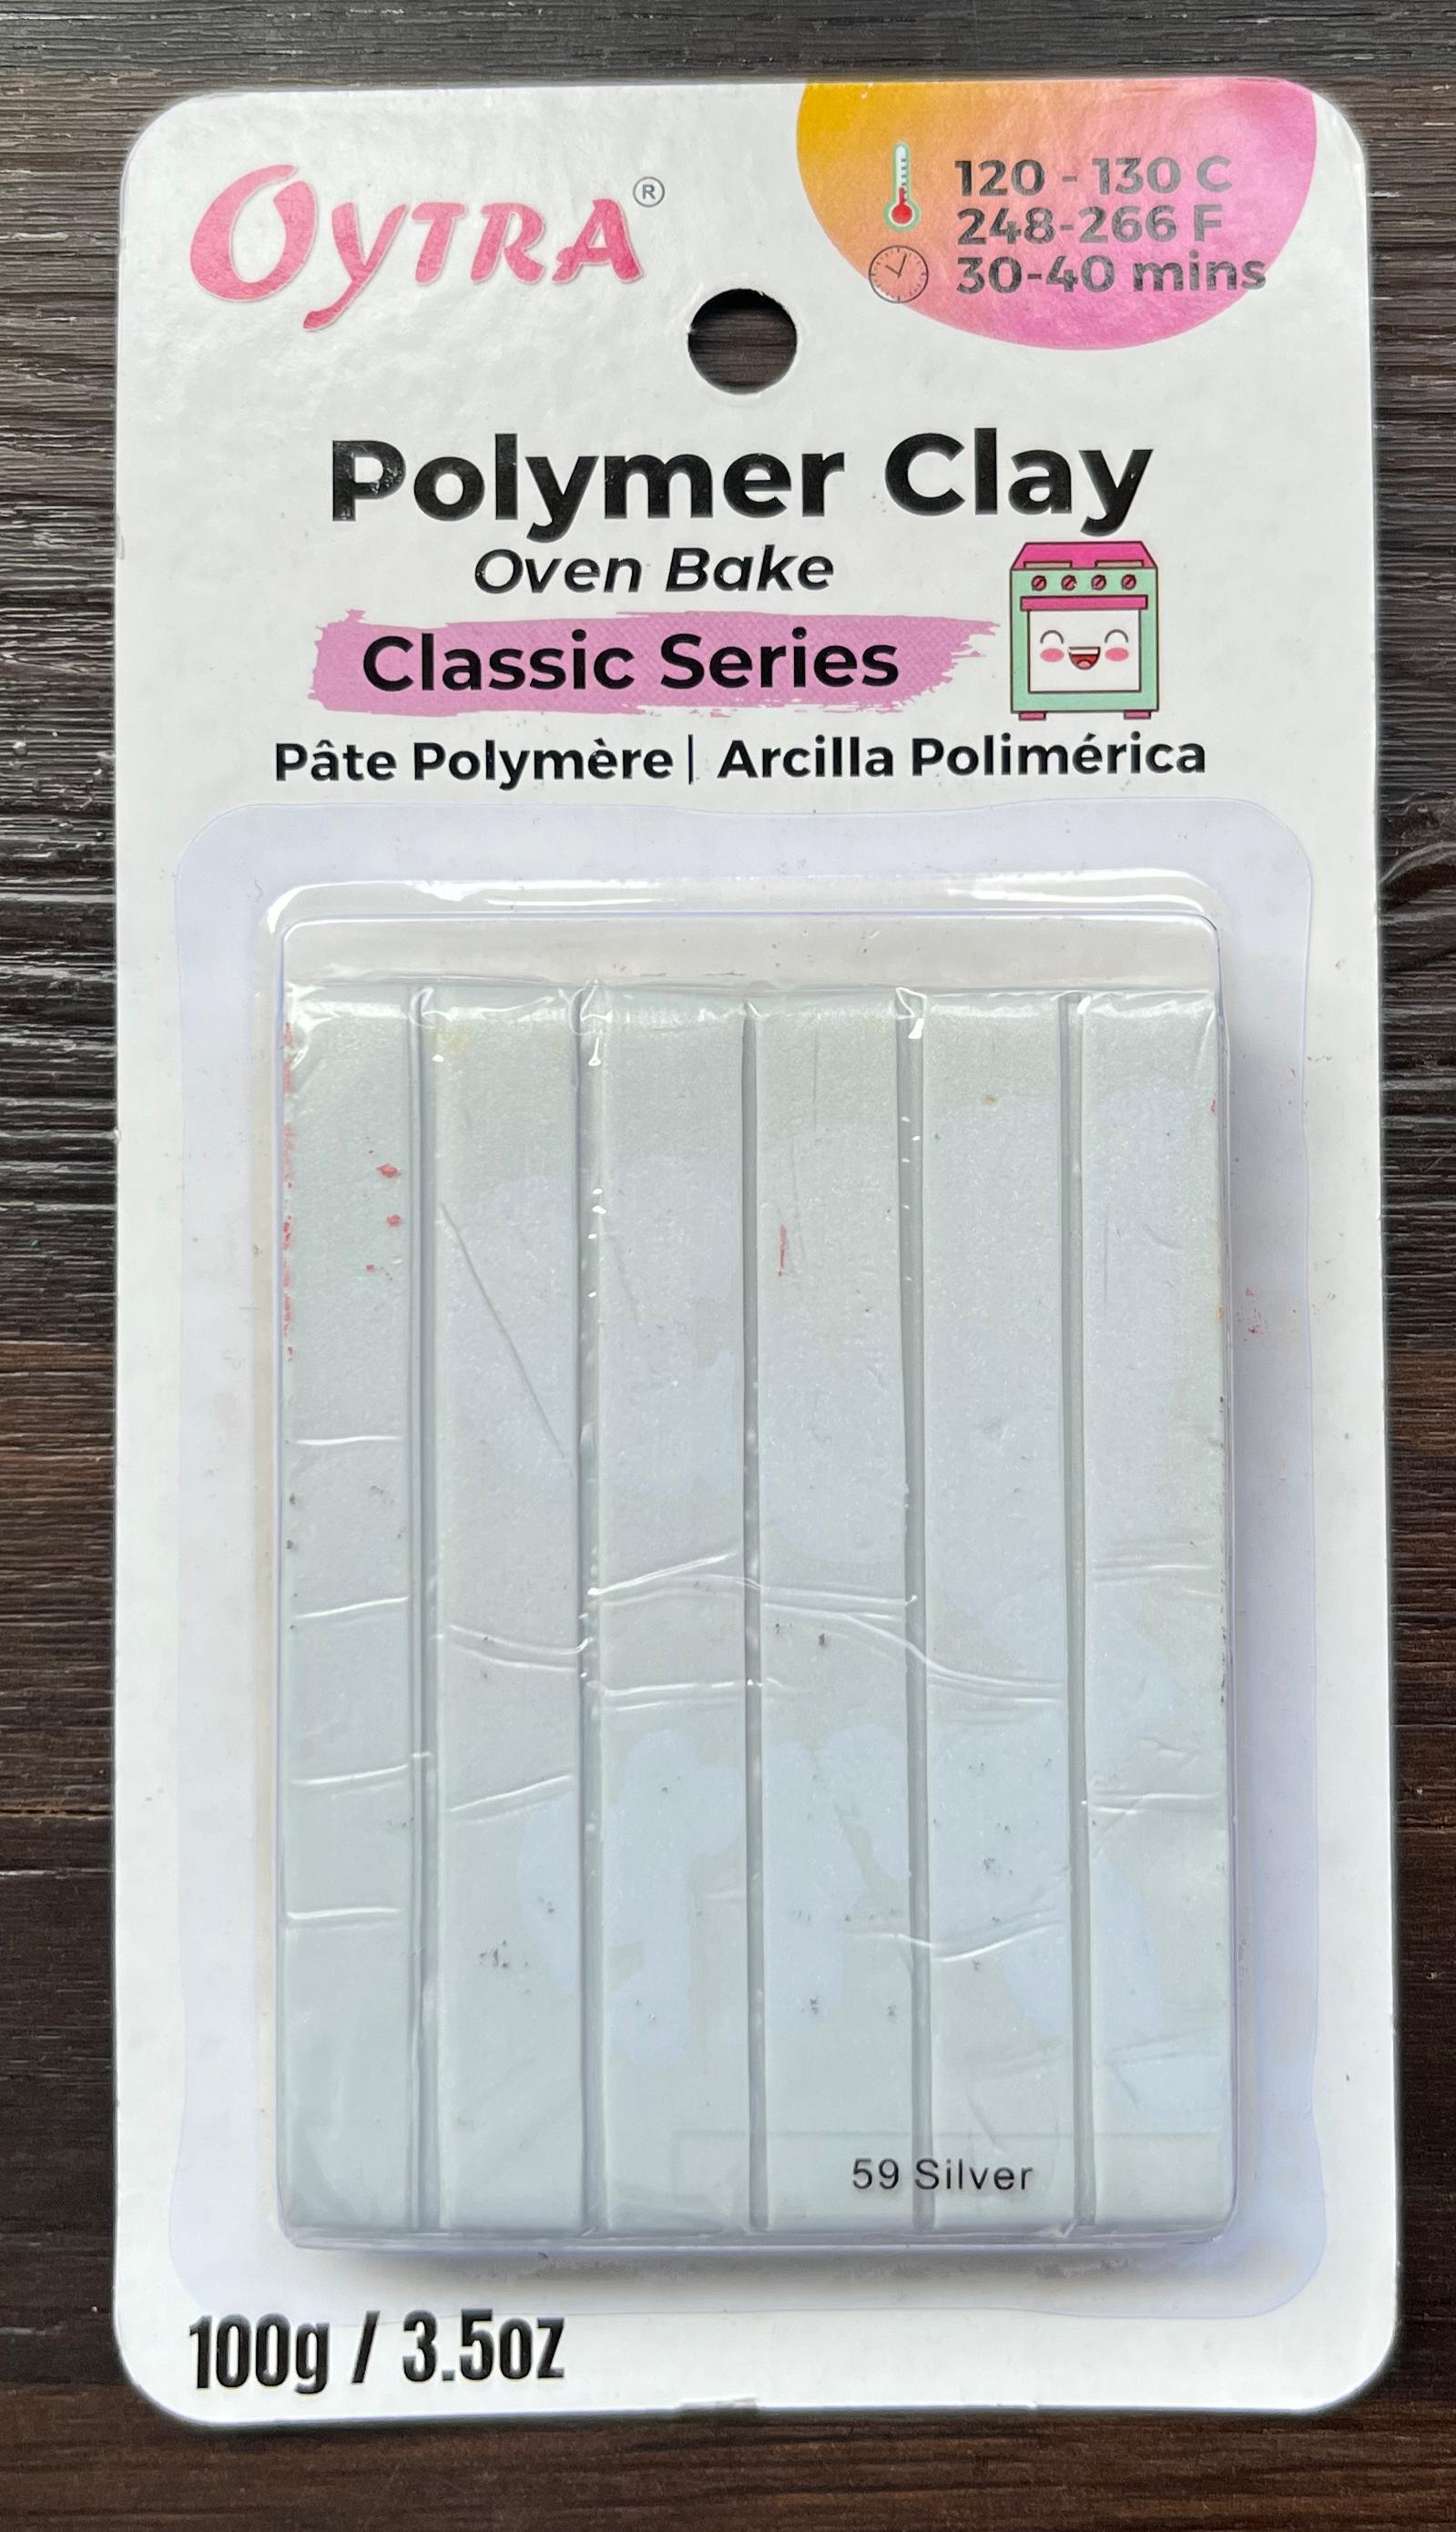 Polymer Clay Oven Bake Classic Series Silver 59 - Oytra